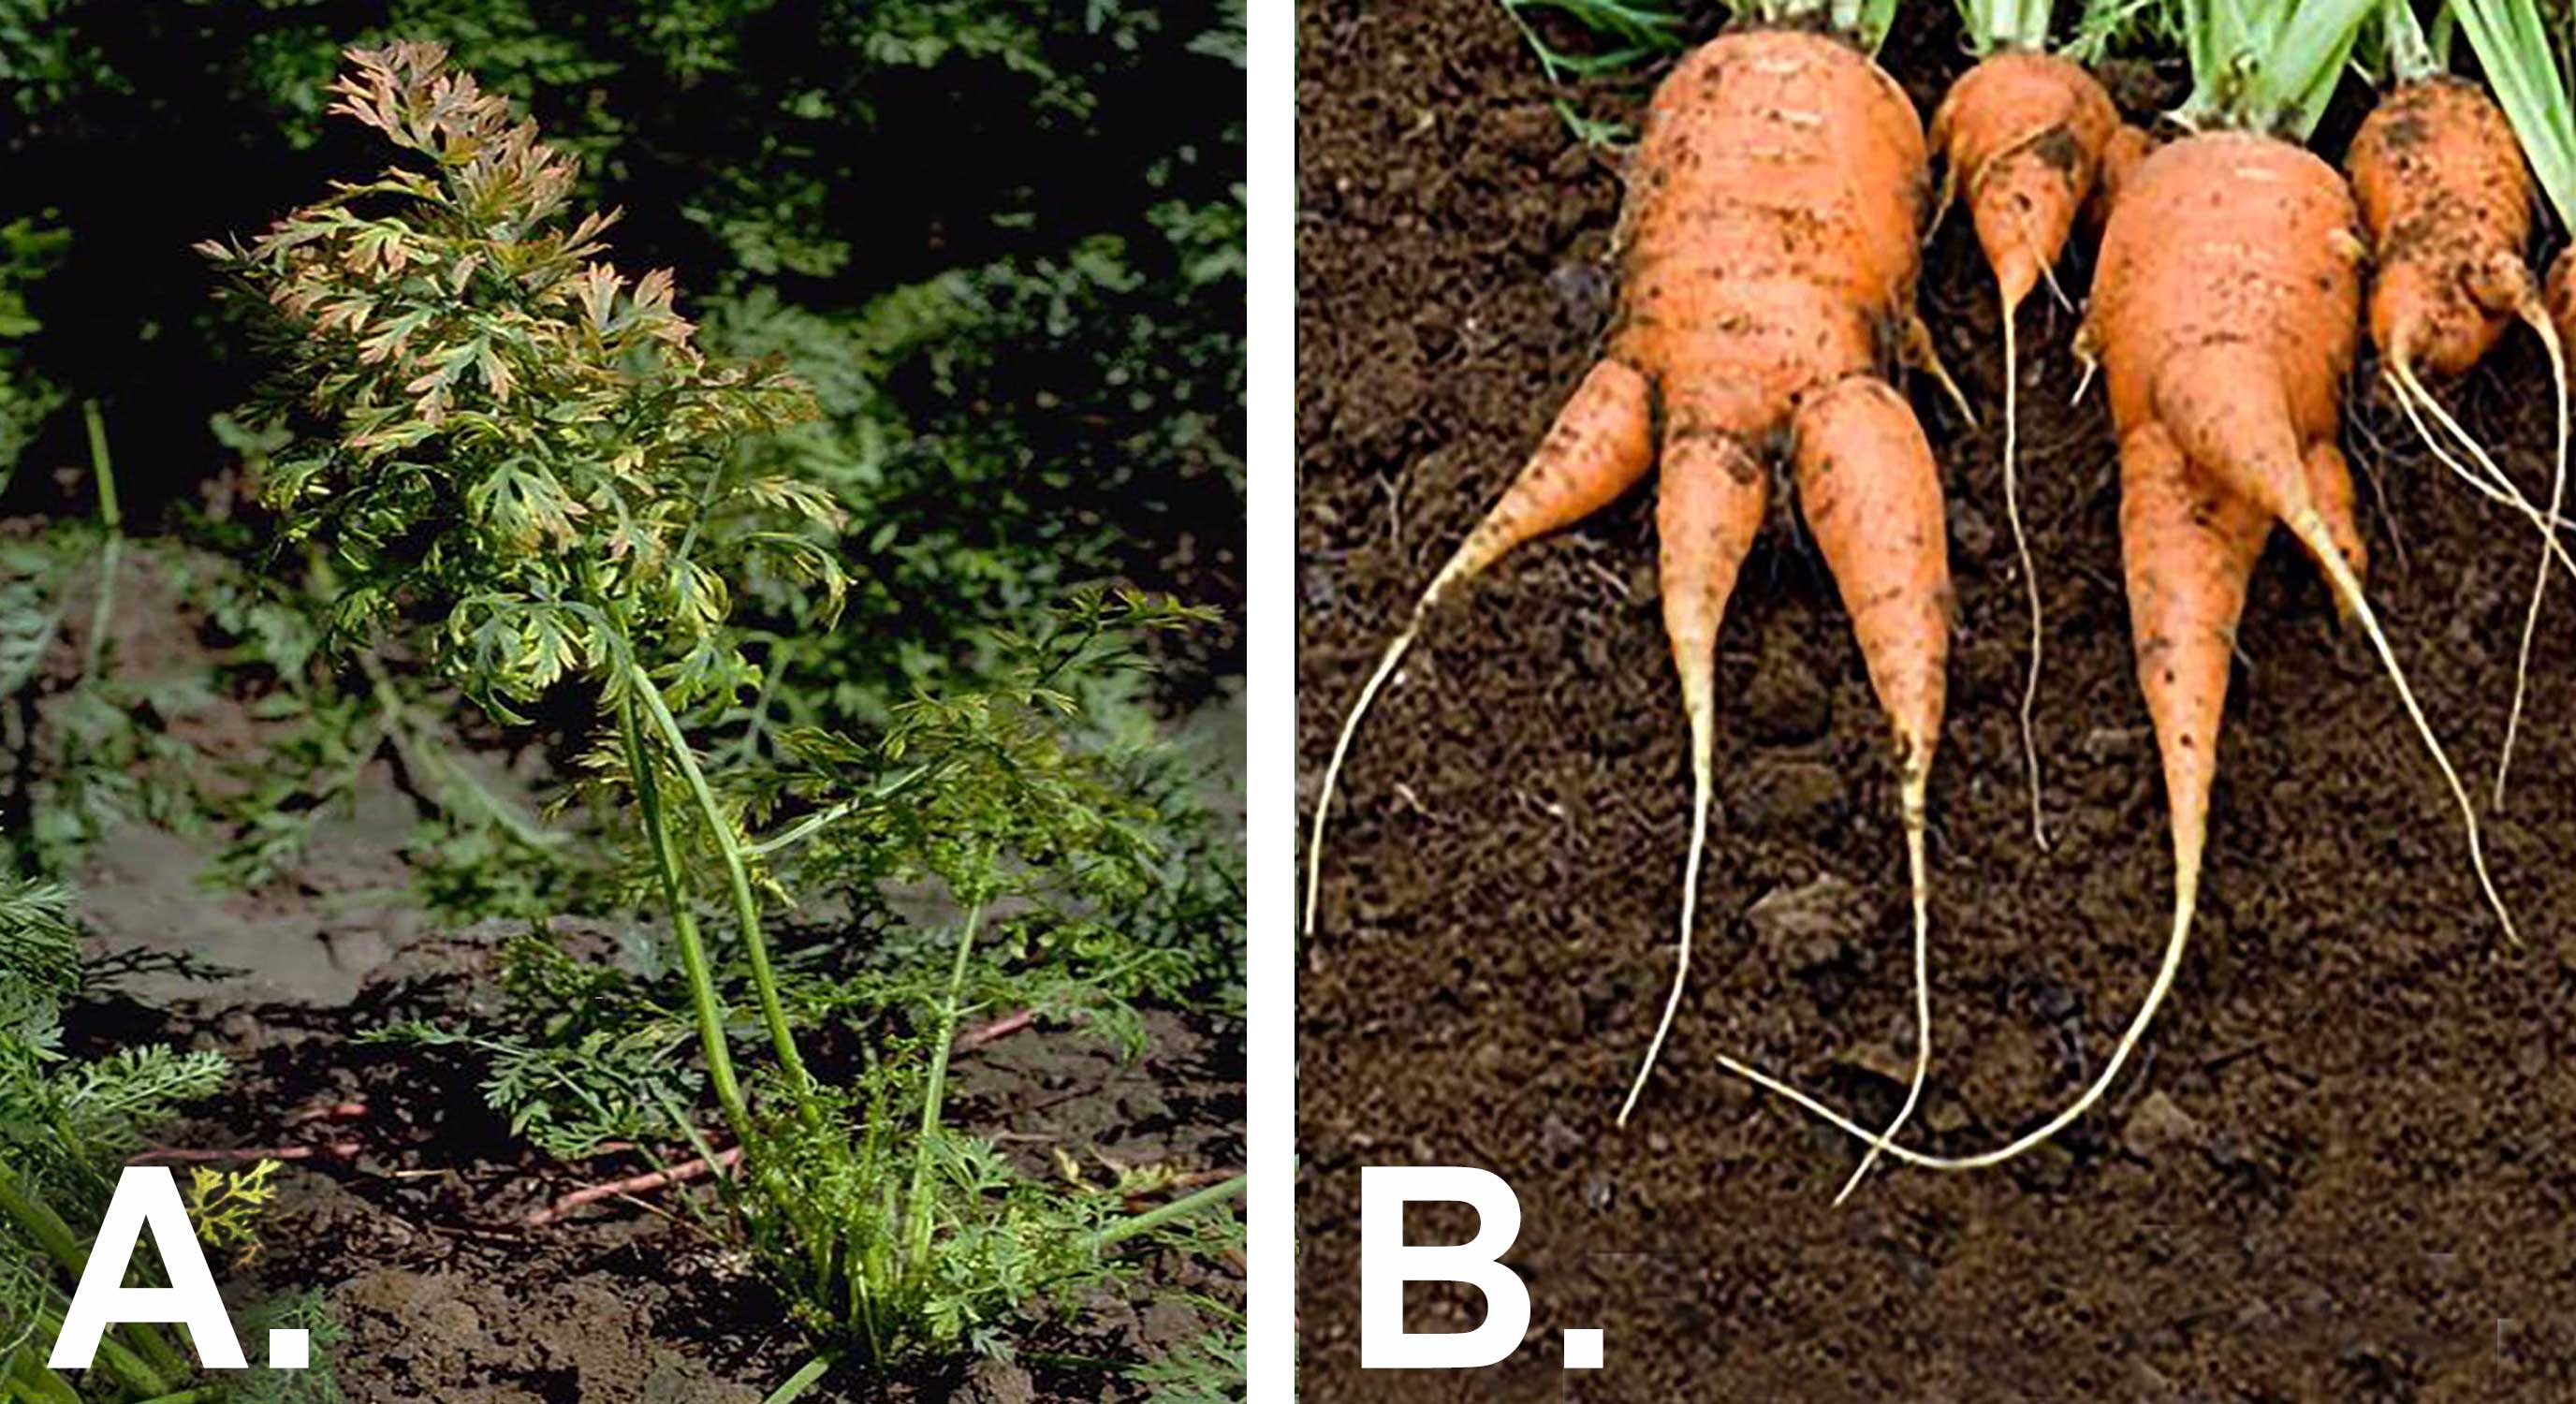 Two photos of common carrot diseases side-by-side. The first is labeled "A" and shows yellowing leaves on carrot greens due to Aster Yellows disease. The second is labeled "B" and shows several four uprooted carrots with multiple, forked roots due to forked root disorder.